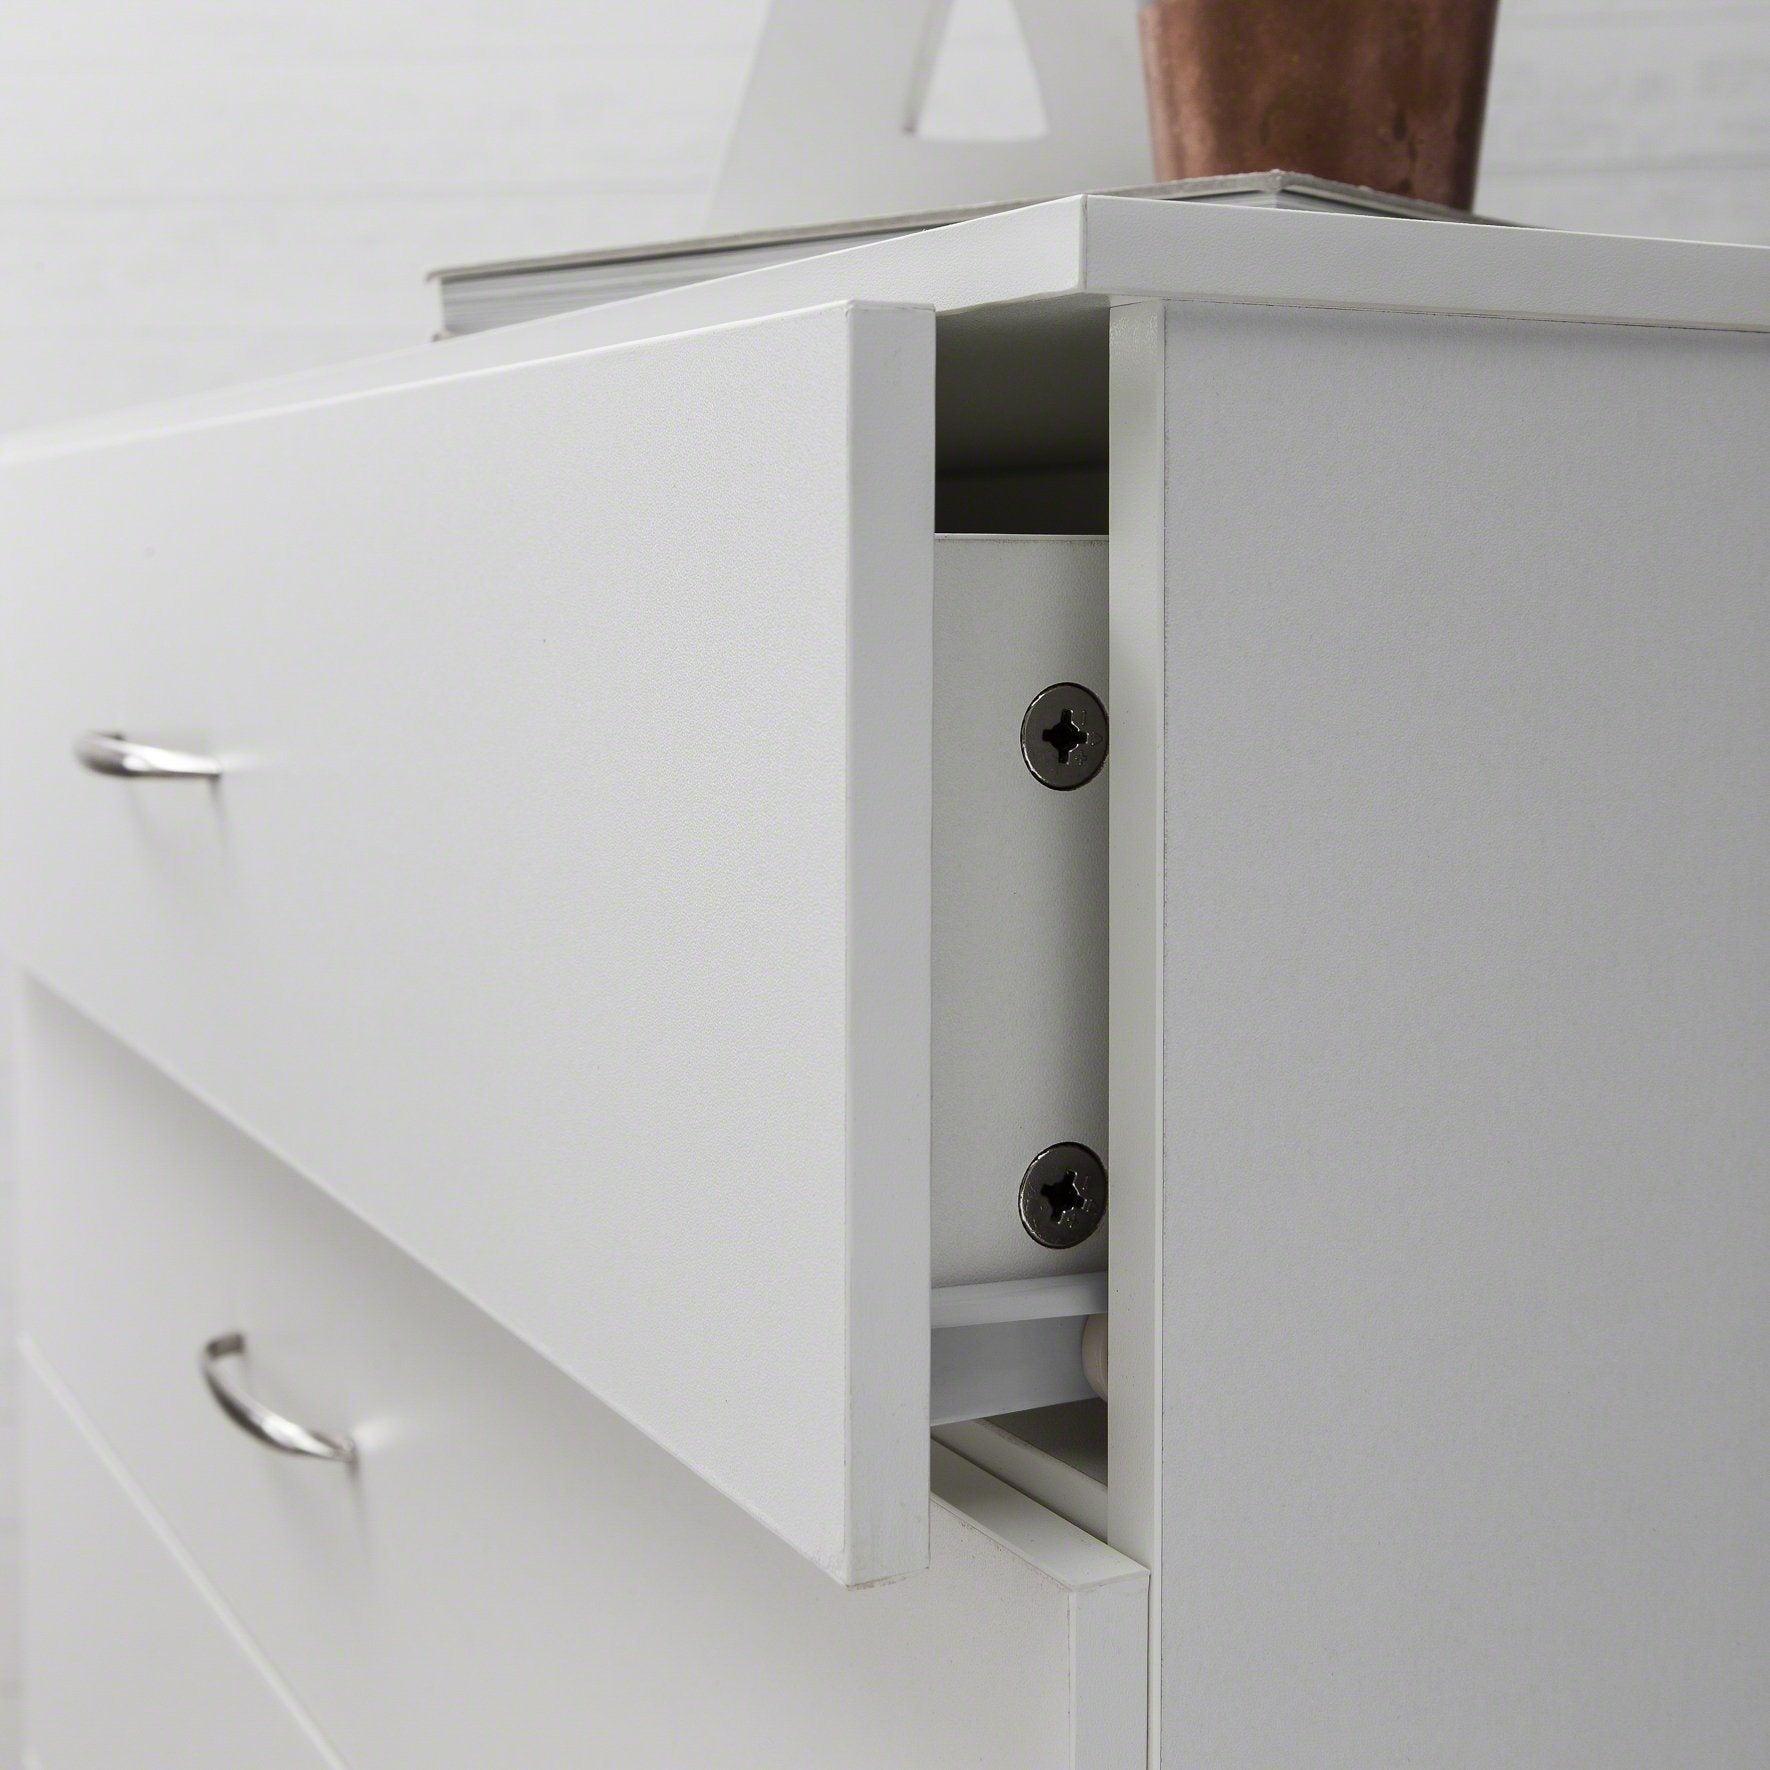 Essie 8 Chest of Drawers - Pure White - Laura James